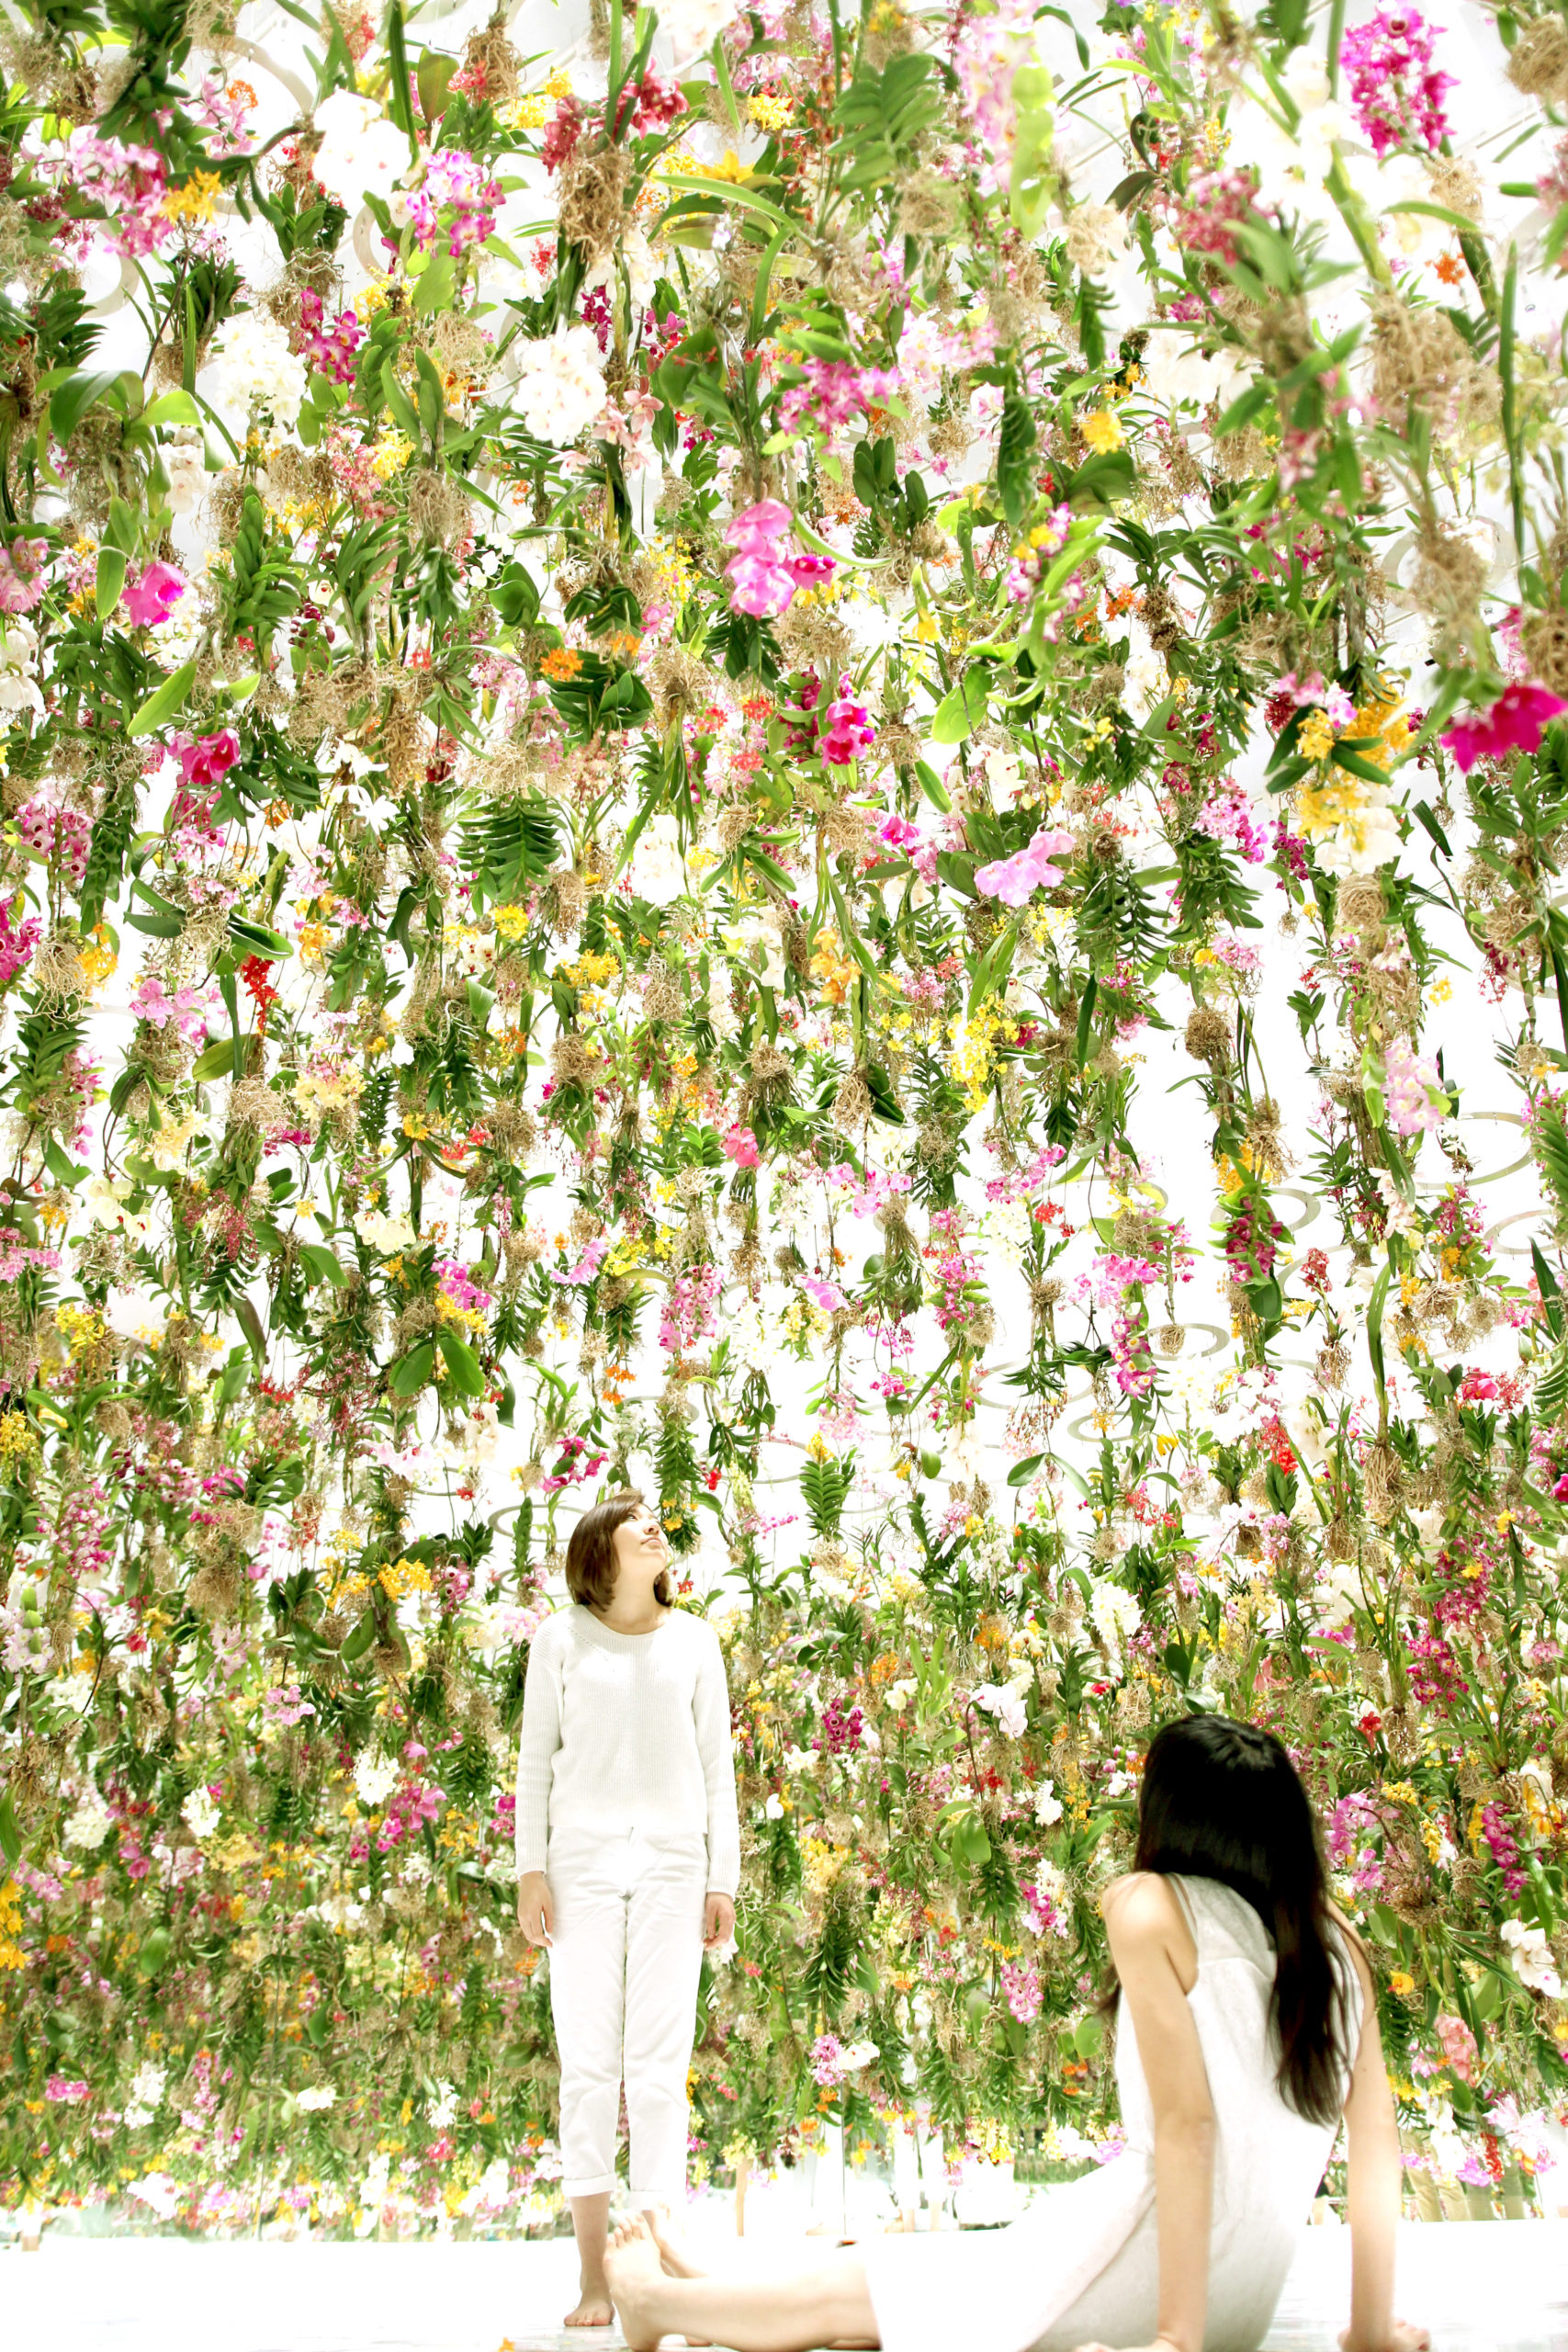 A Hanging Garden That Floats Through Space To Meet Your Nose